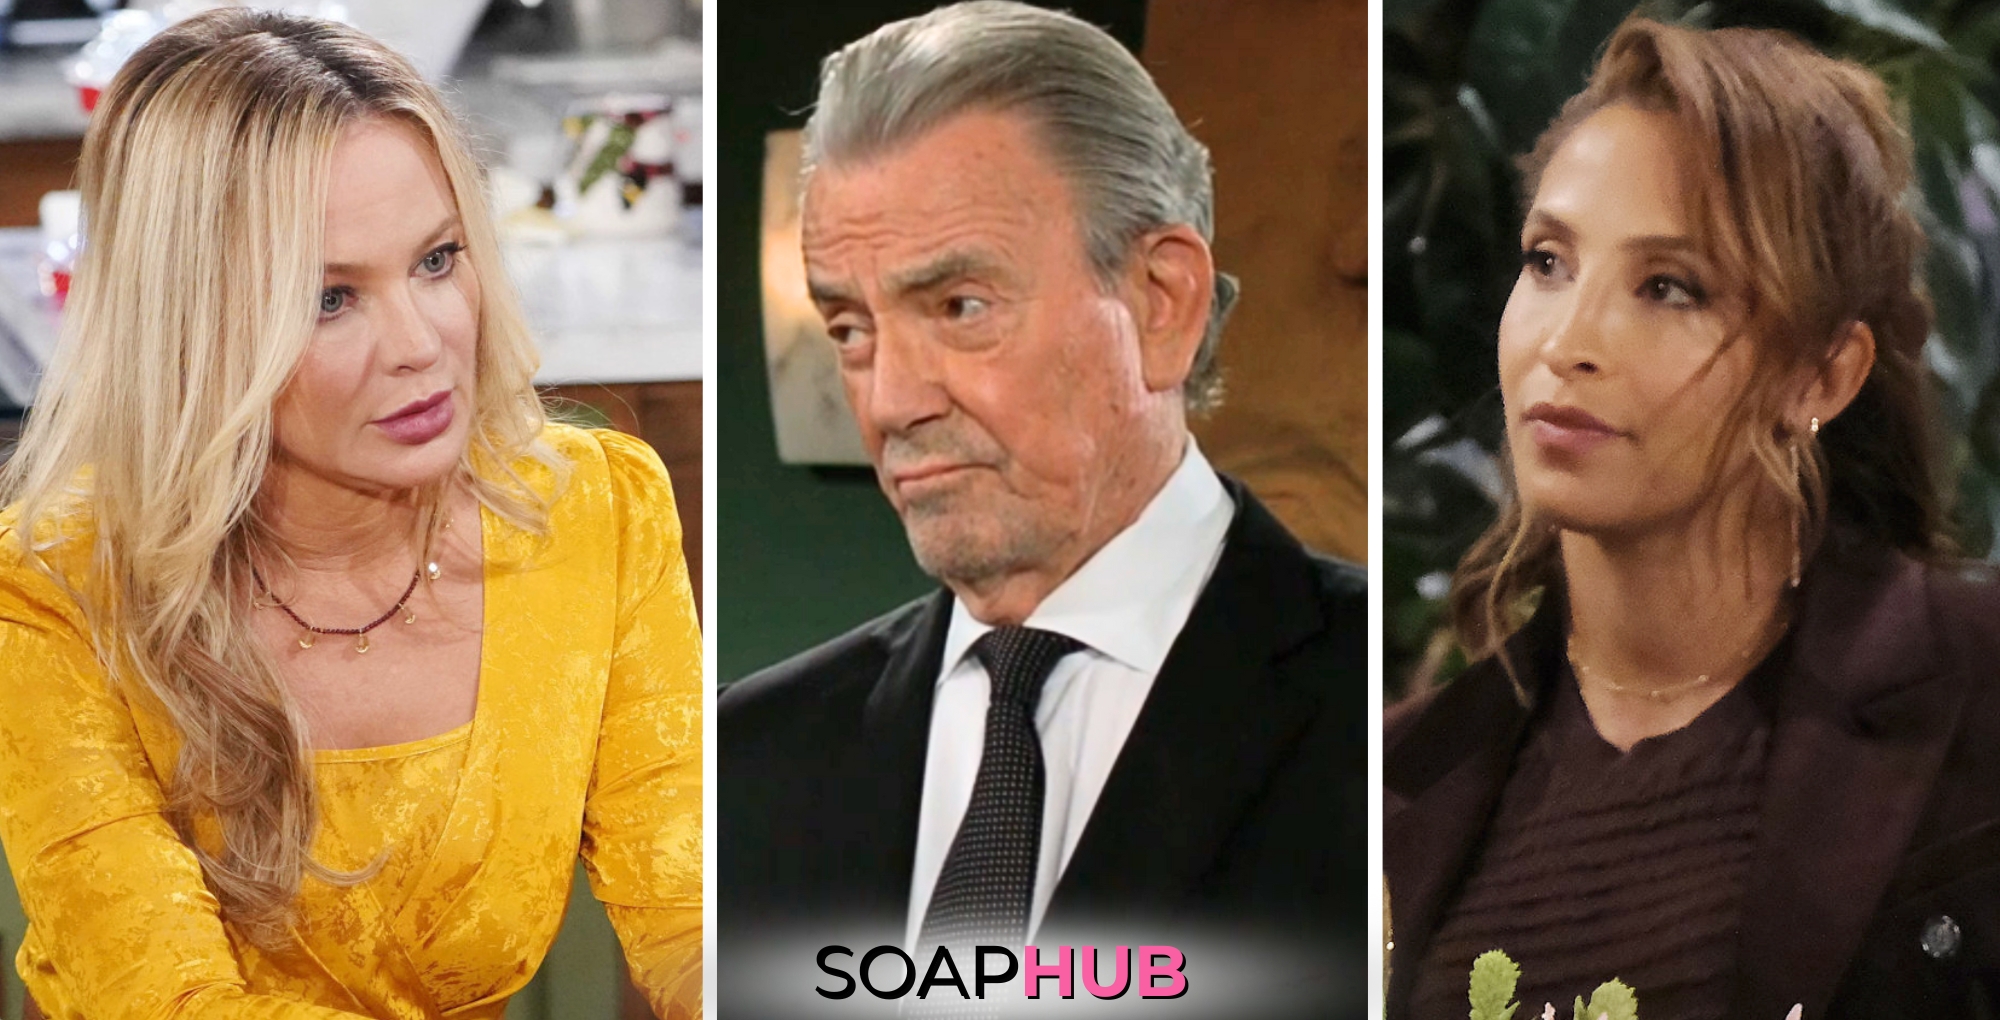 Young and the Restless spoilers weekly update features Sharon, Victor, and Lily with the Soap Hub logo across the bottom.